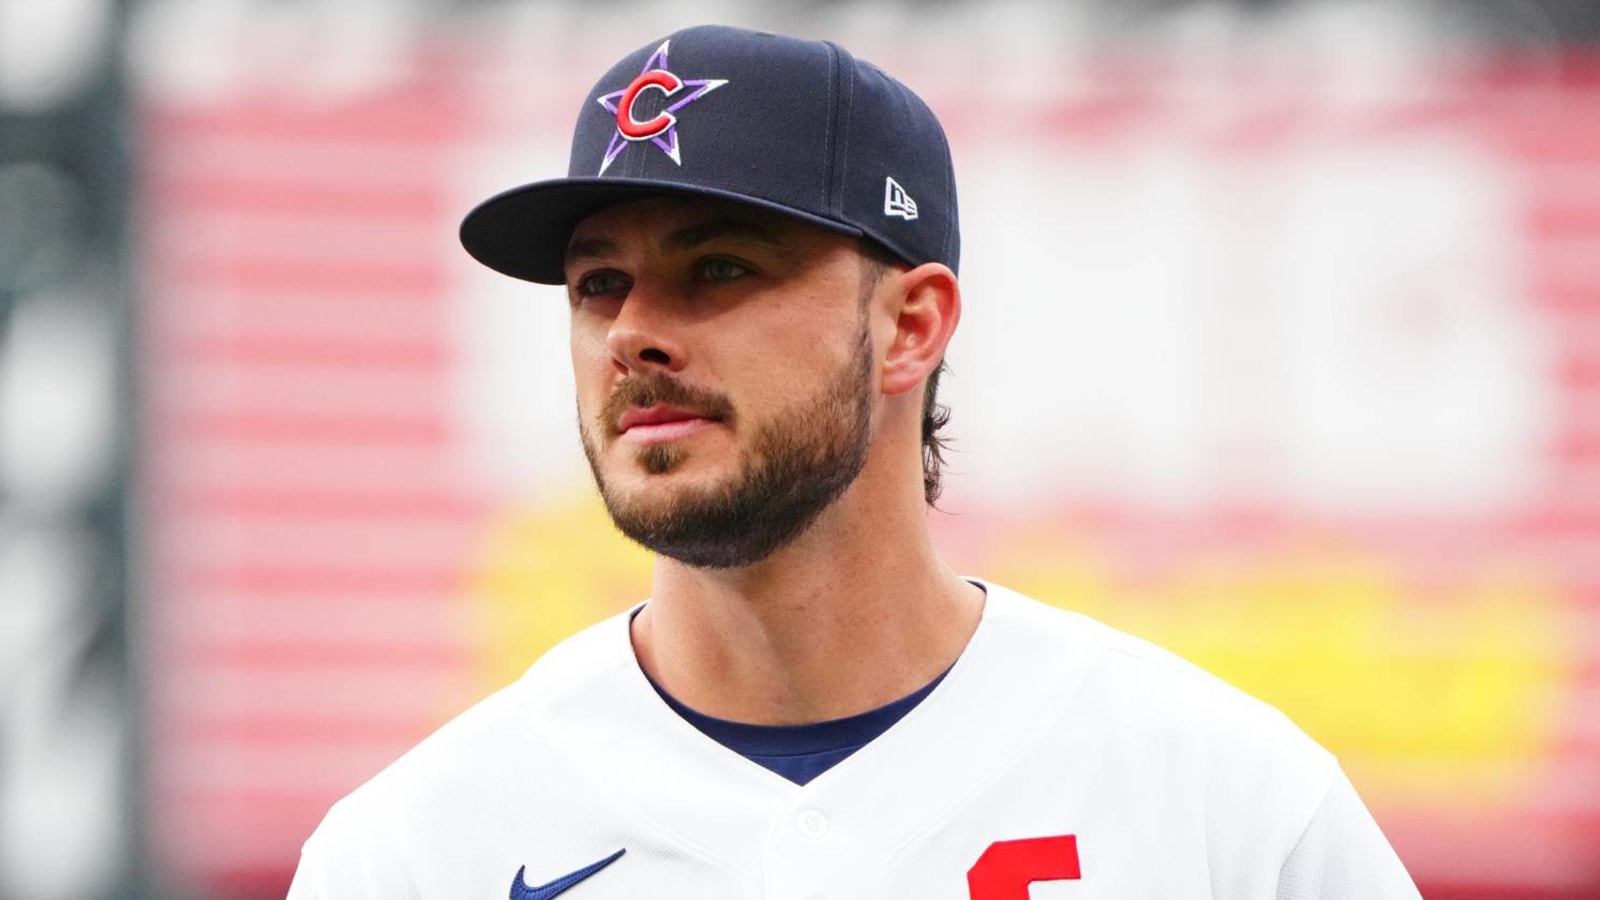 Kris Bryant traded to Giants